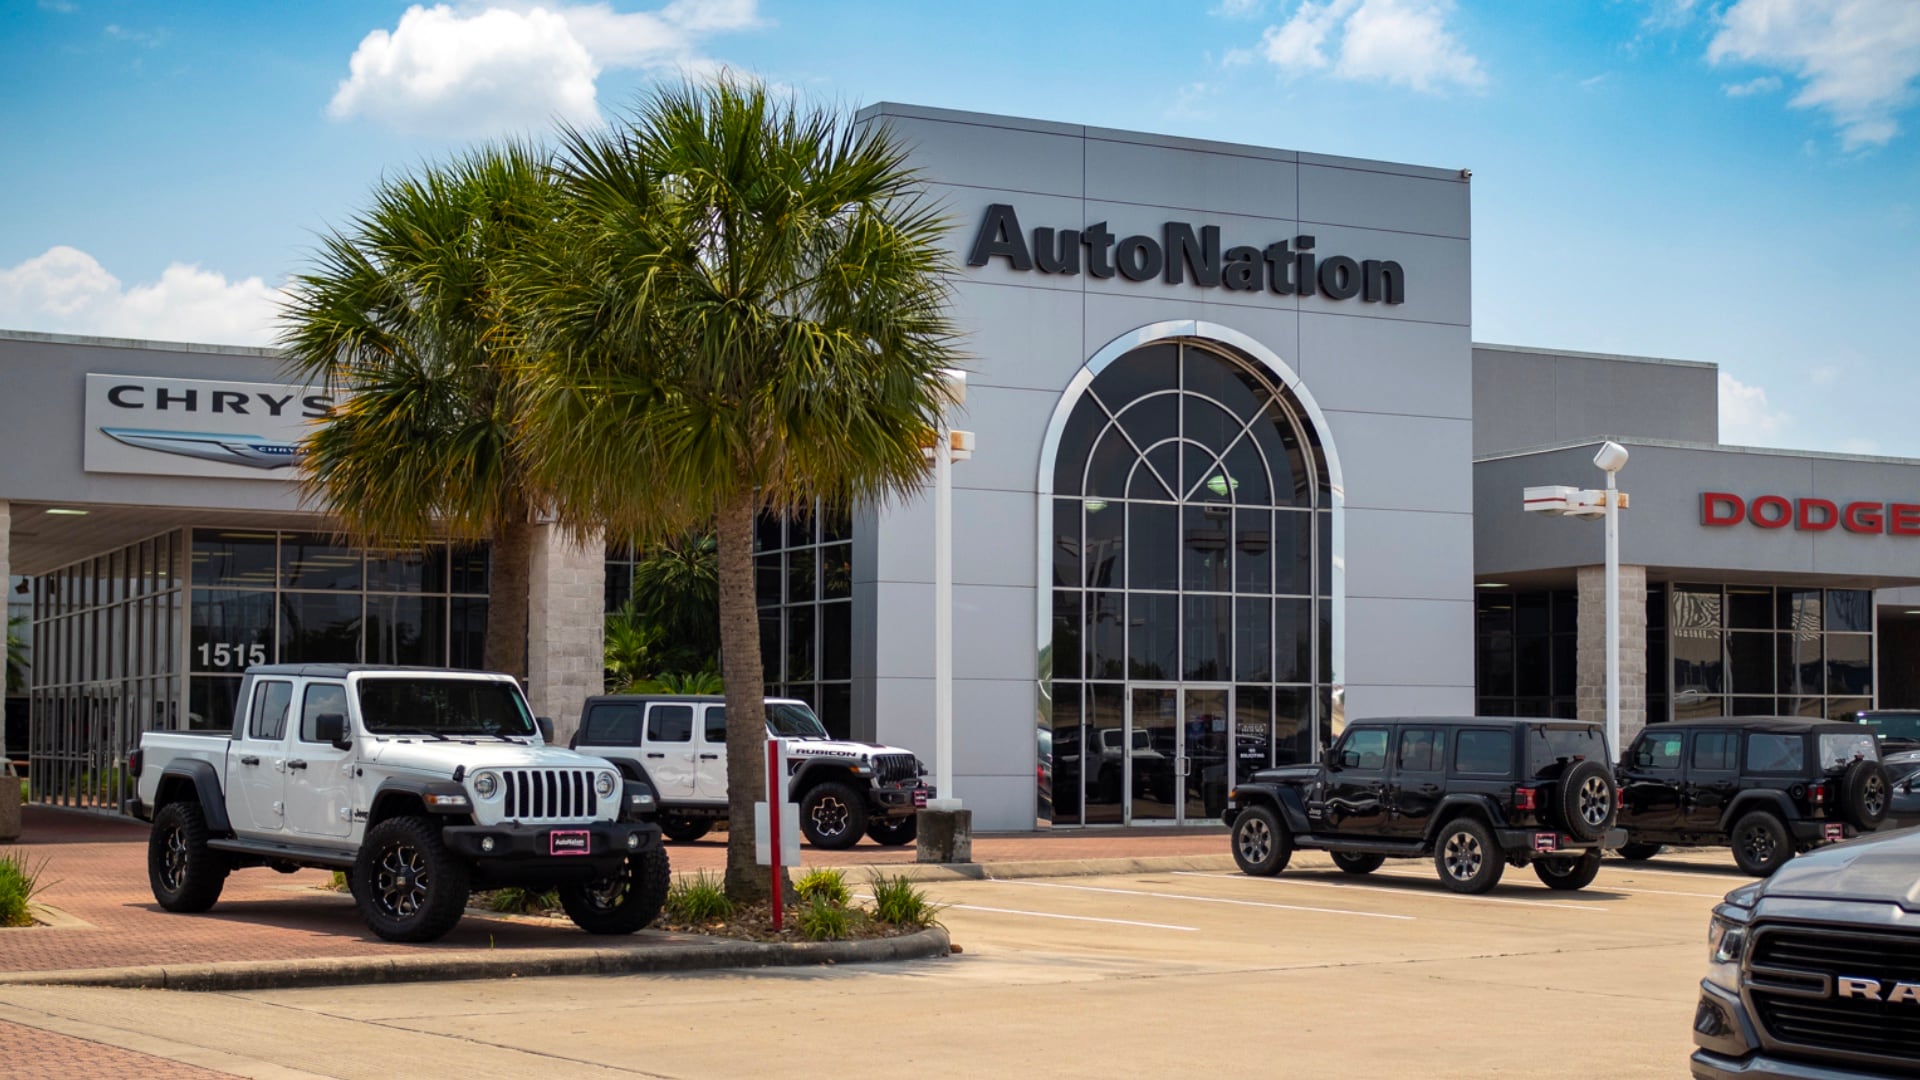 Exterior view of AutoNation Chrysler Dodge Jeep Ram Houston during the day. There is a clear blue sky and many vehicles parked near the building. Two palm trees are visible in the parking lot.